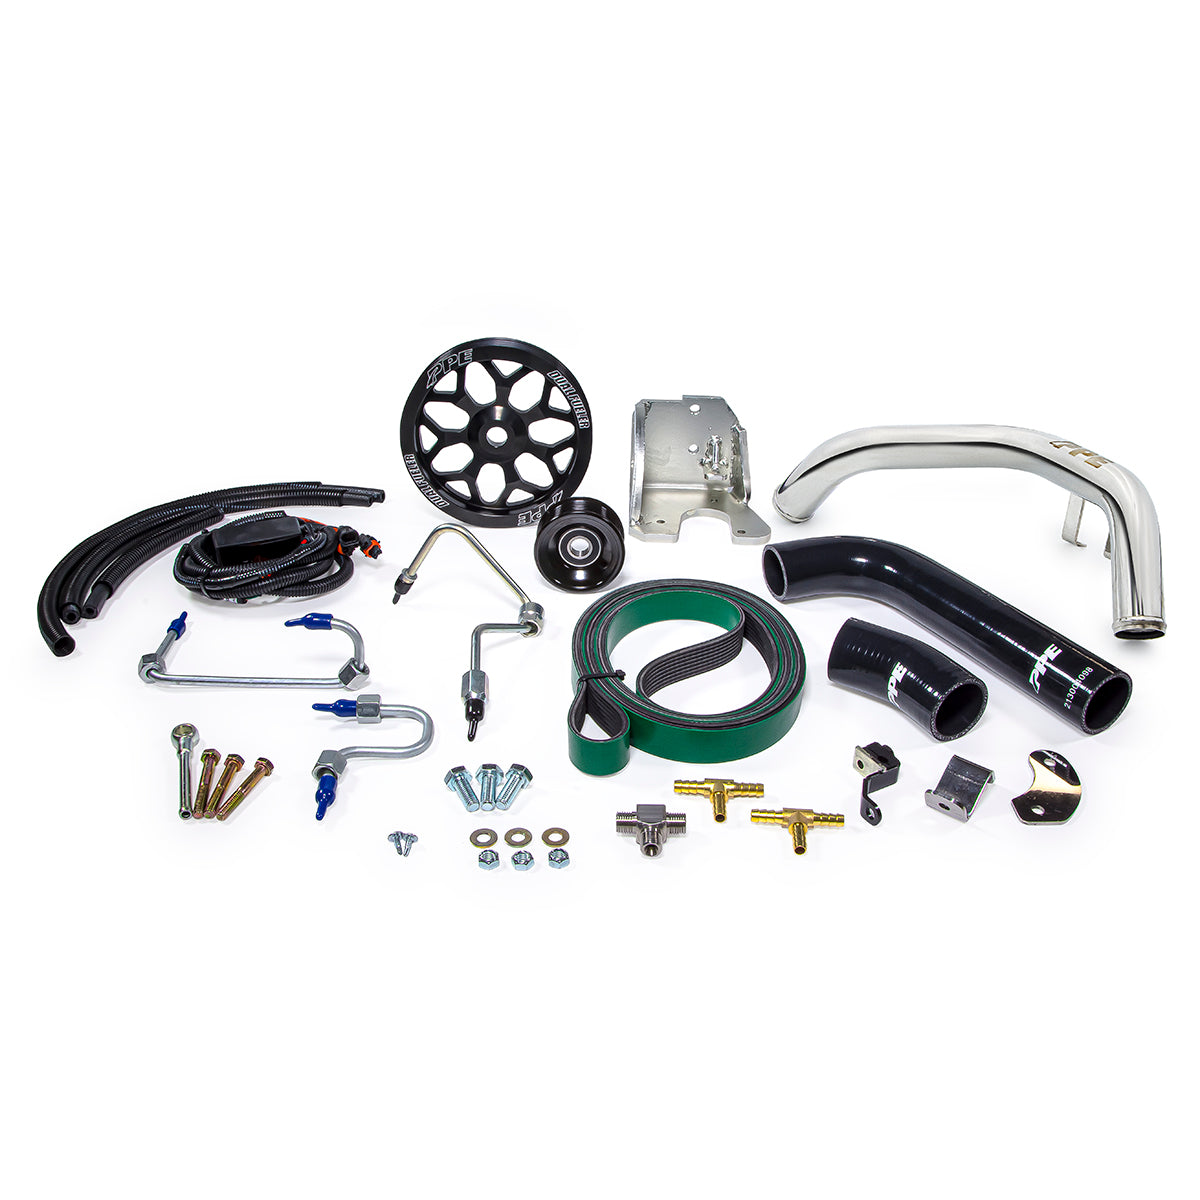 2007.5-2012 RAM 2500/3500 6.7L Dual Fueler Installation Kit without Pump (Built To Order)